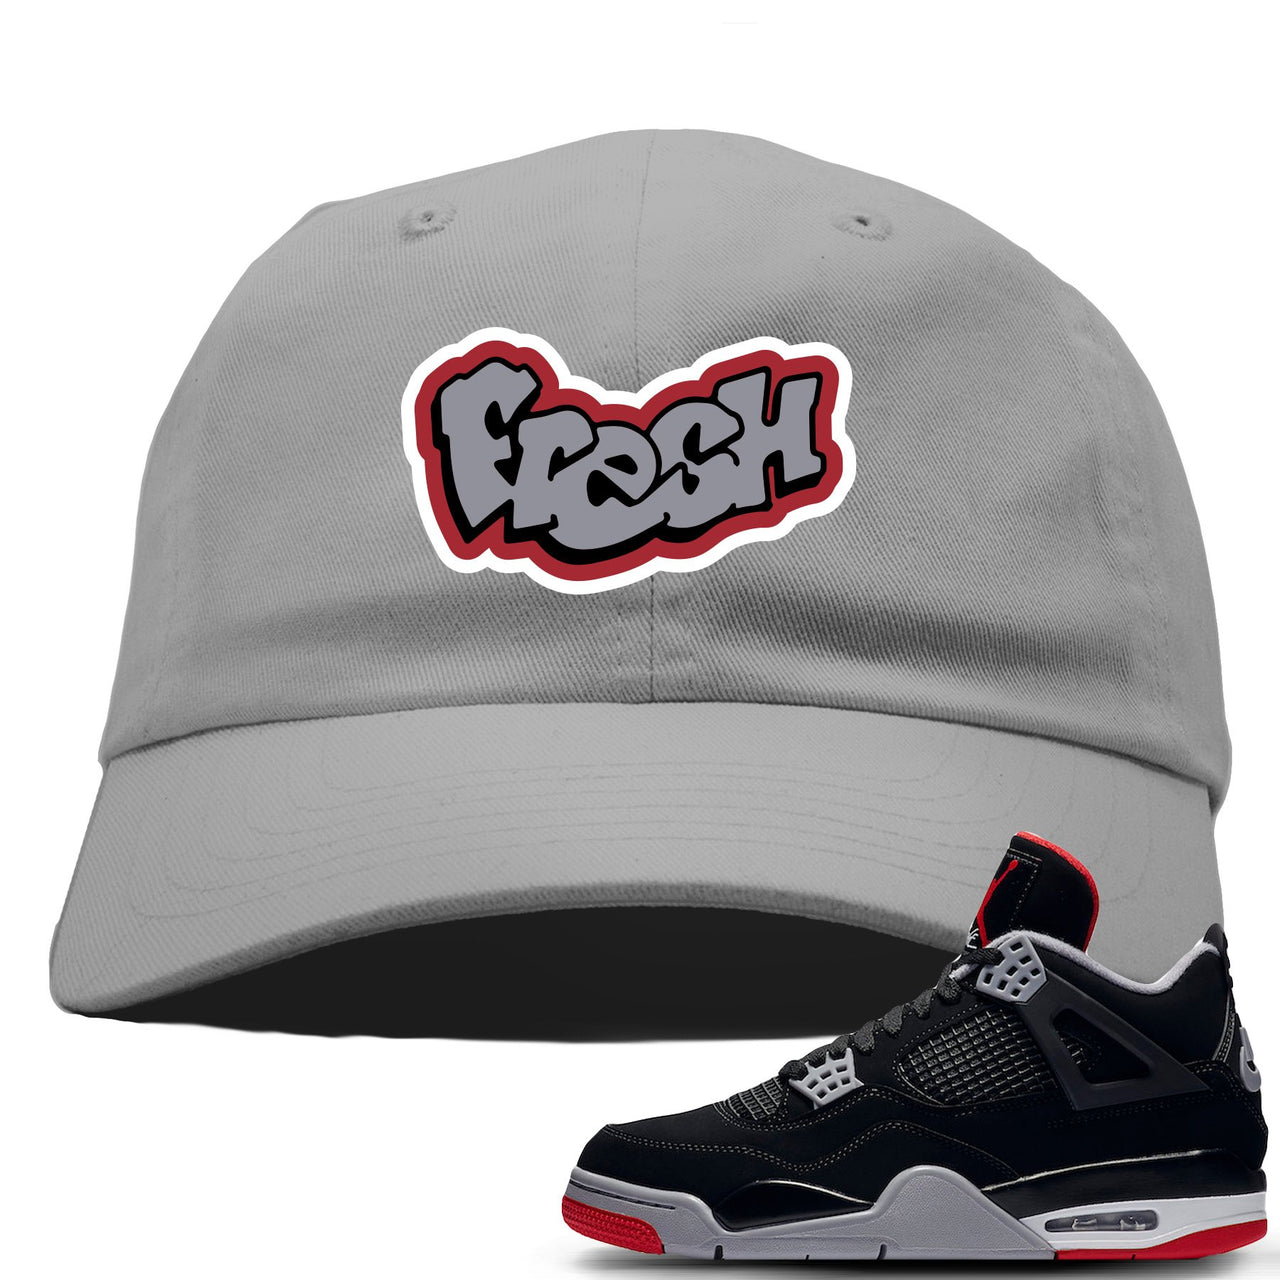 This grey dad hat will match great with your Air Jordan 4 Bred shoes